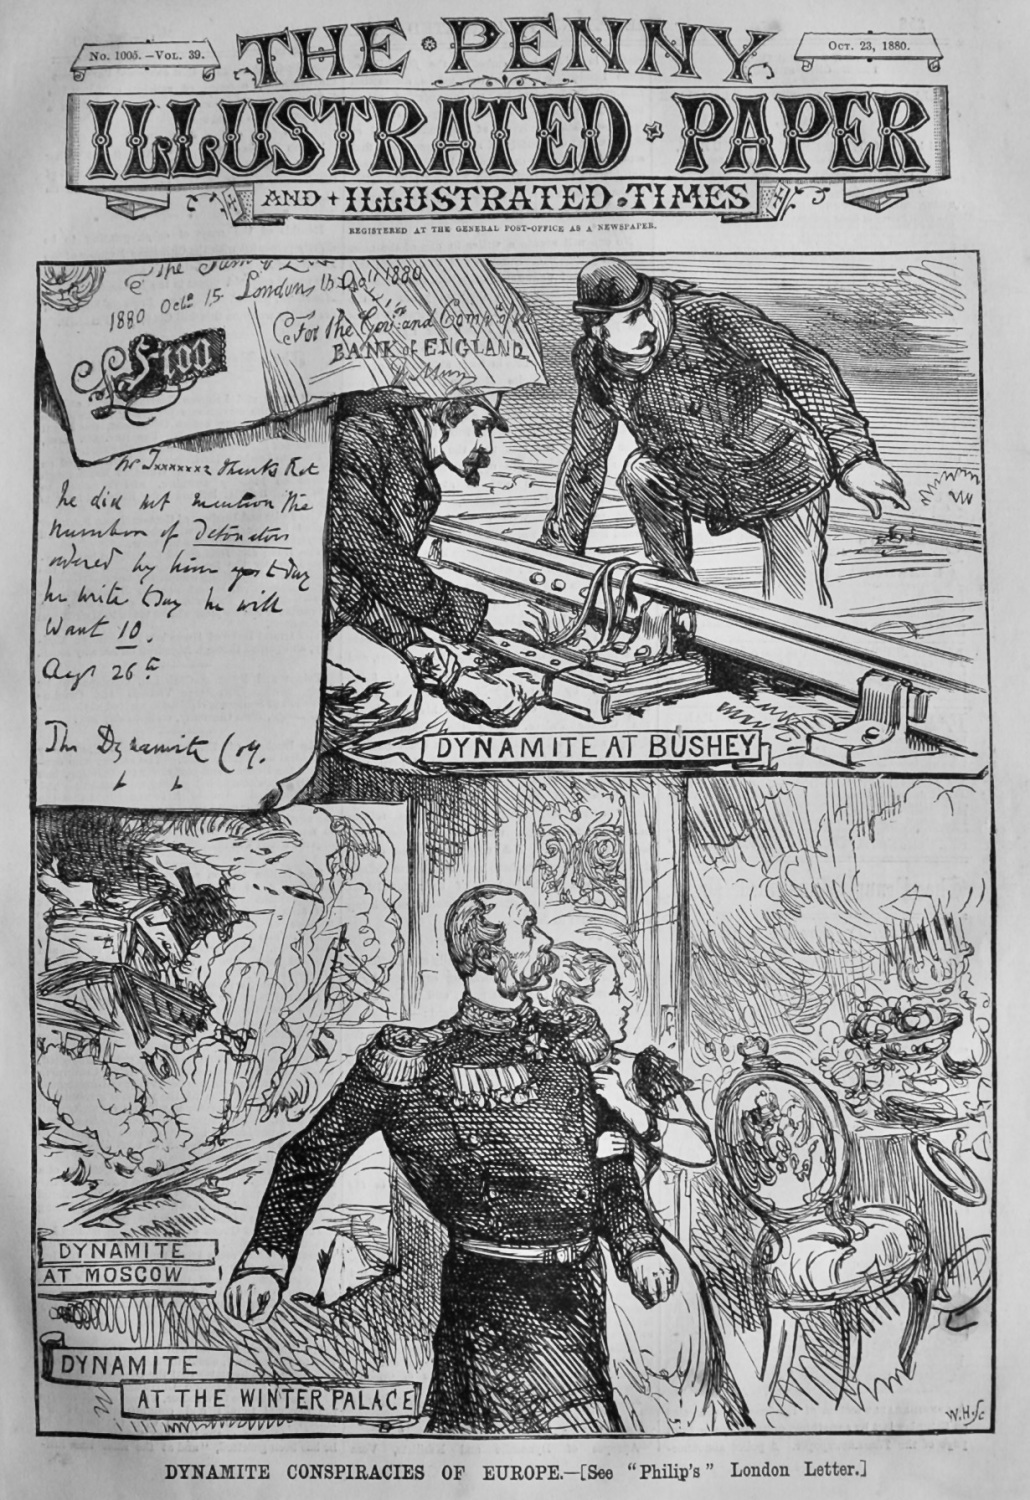 Dynamite Conspiracies of Europe.  1880.